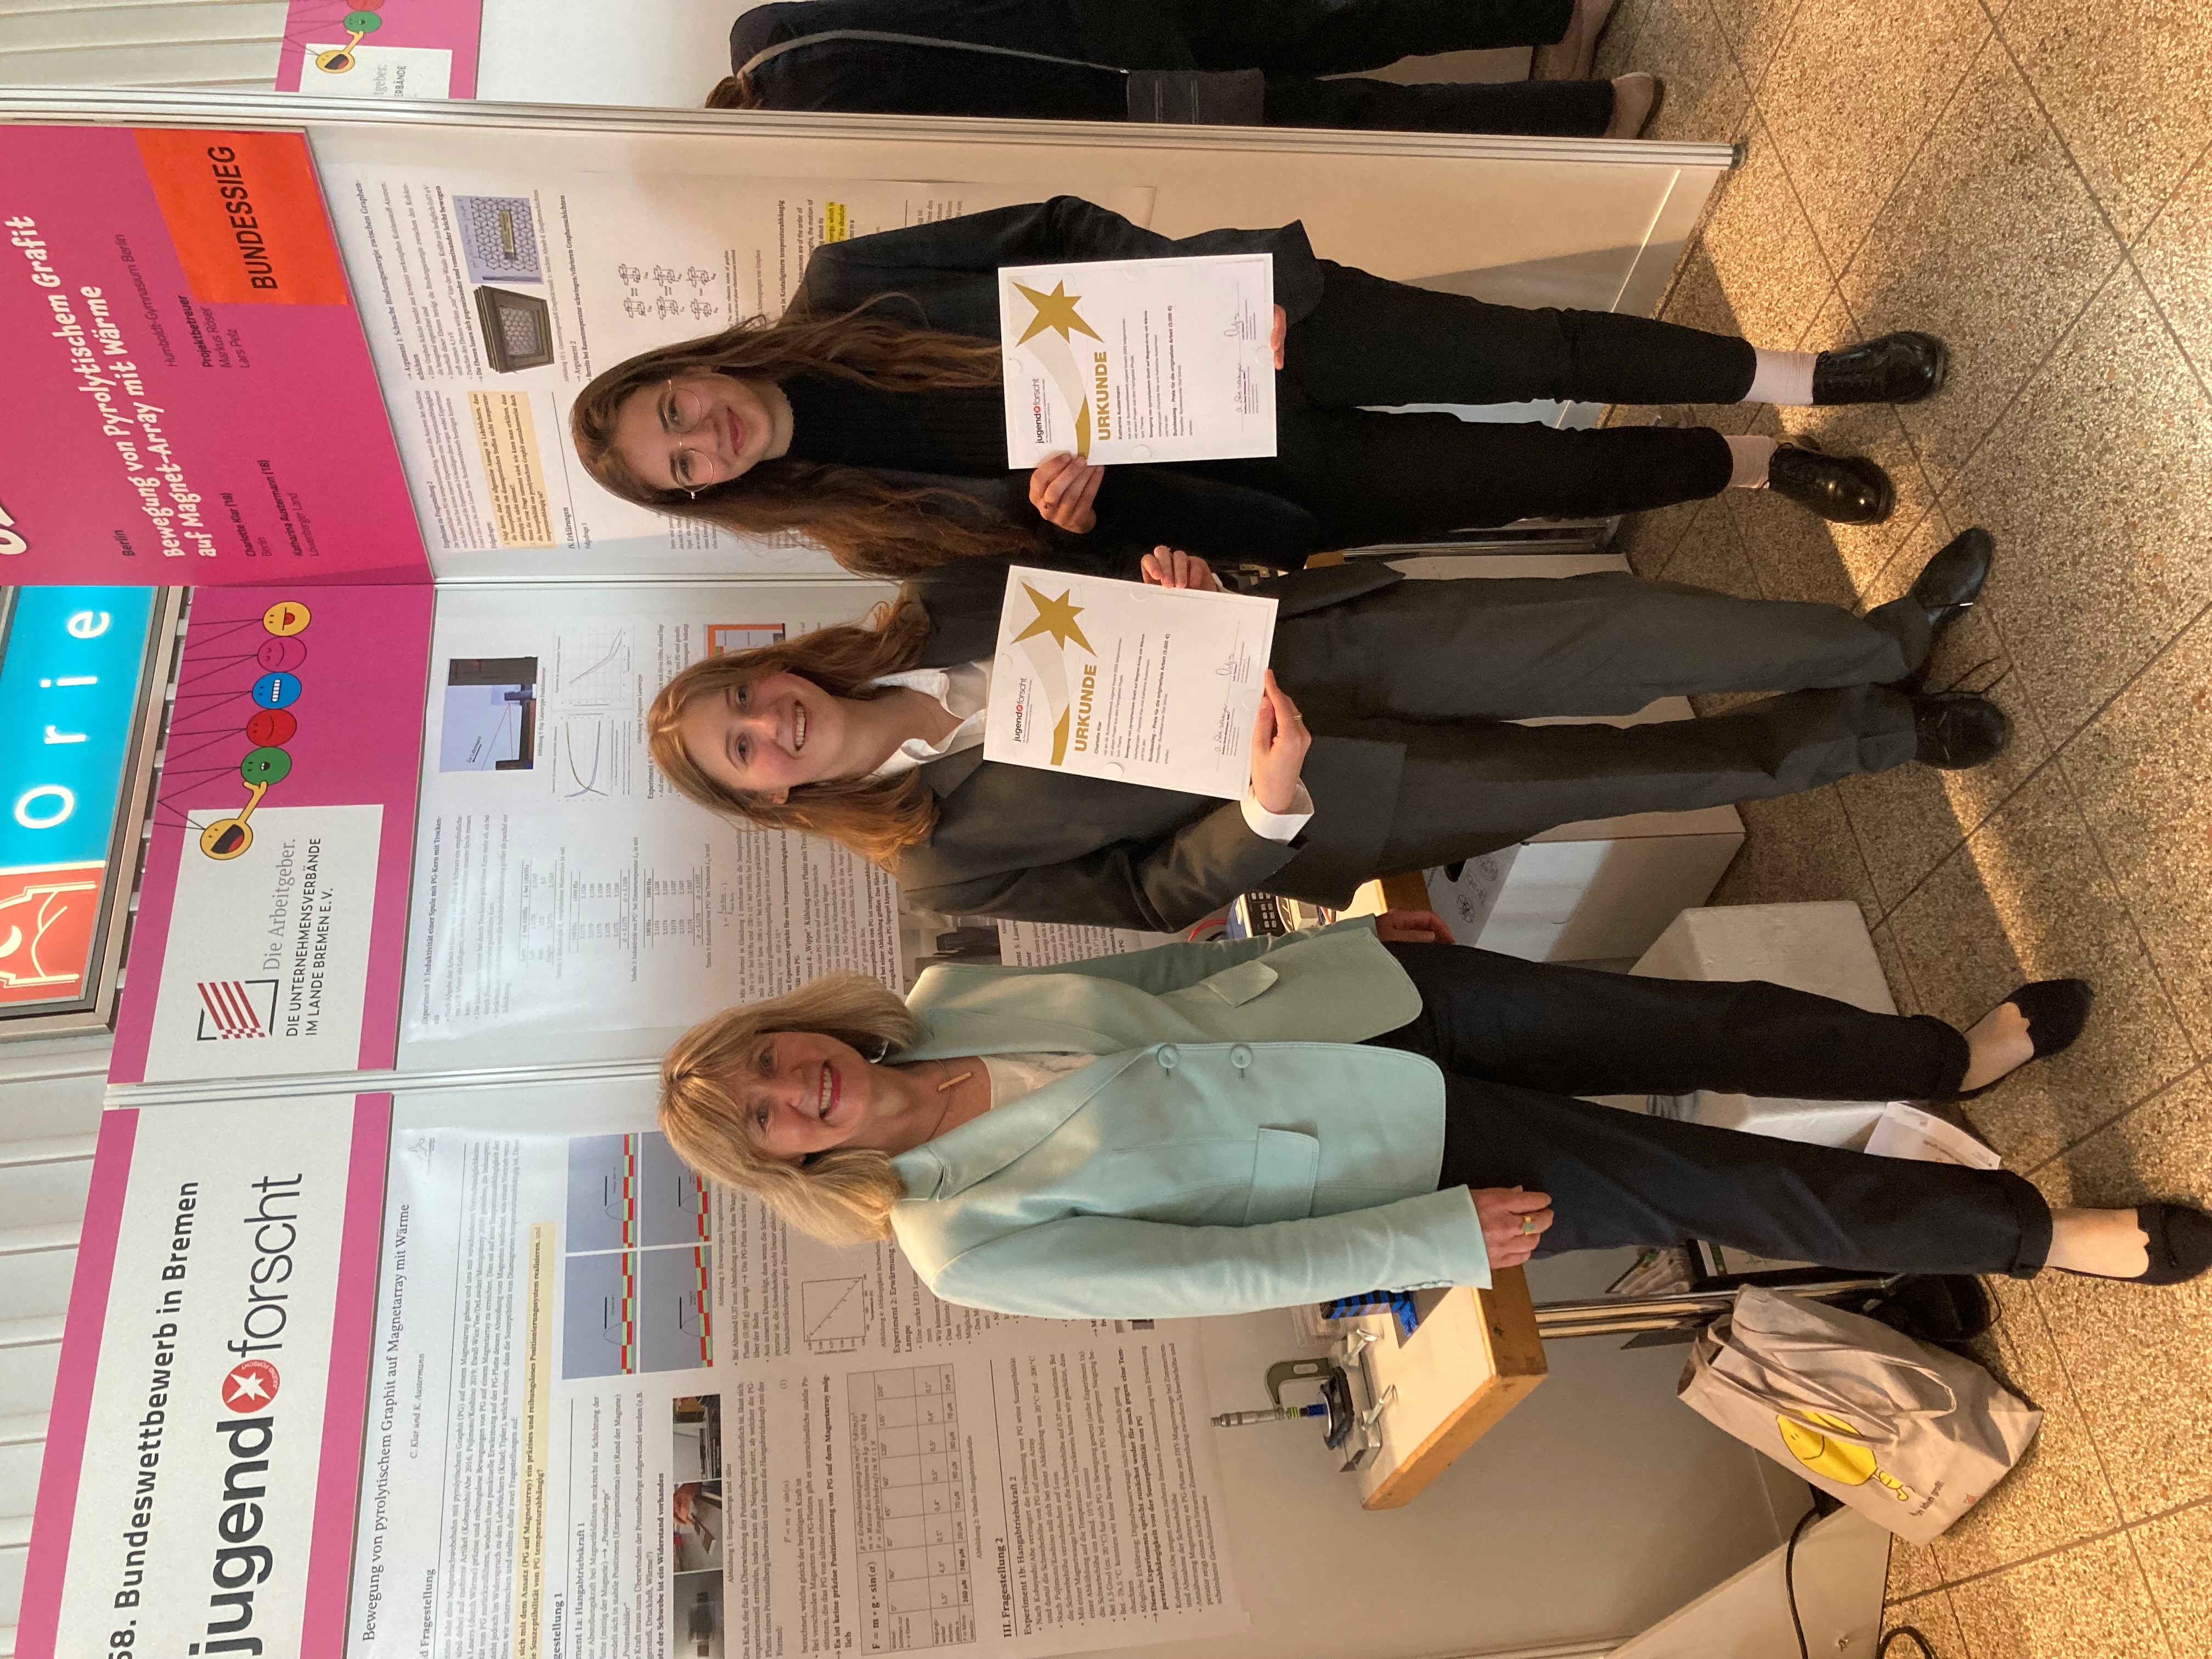 Dr. Heide Ahrens presented the Europe Prize to Charlotte Klar and Katharina Austermann (from left to right)